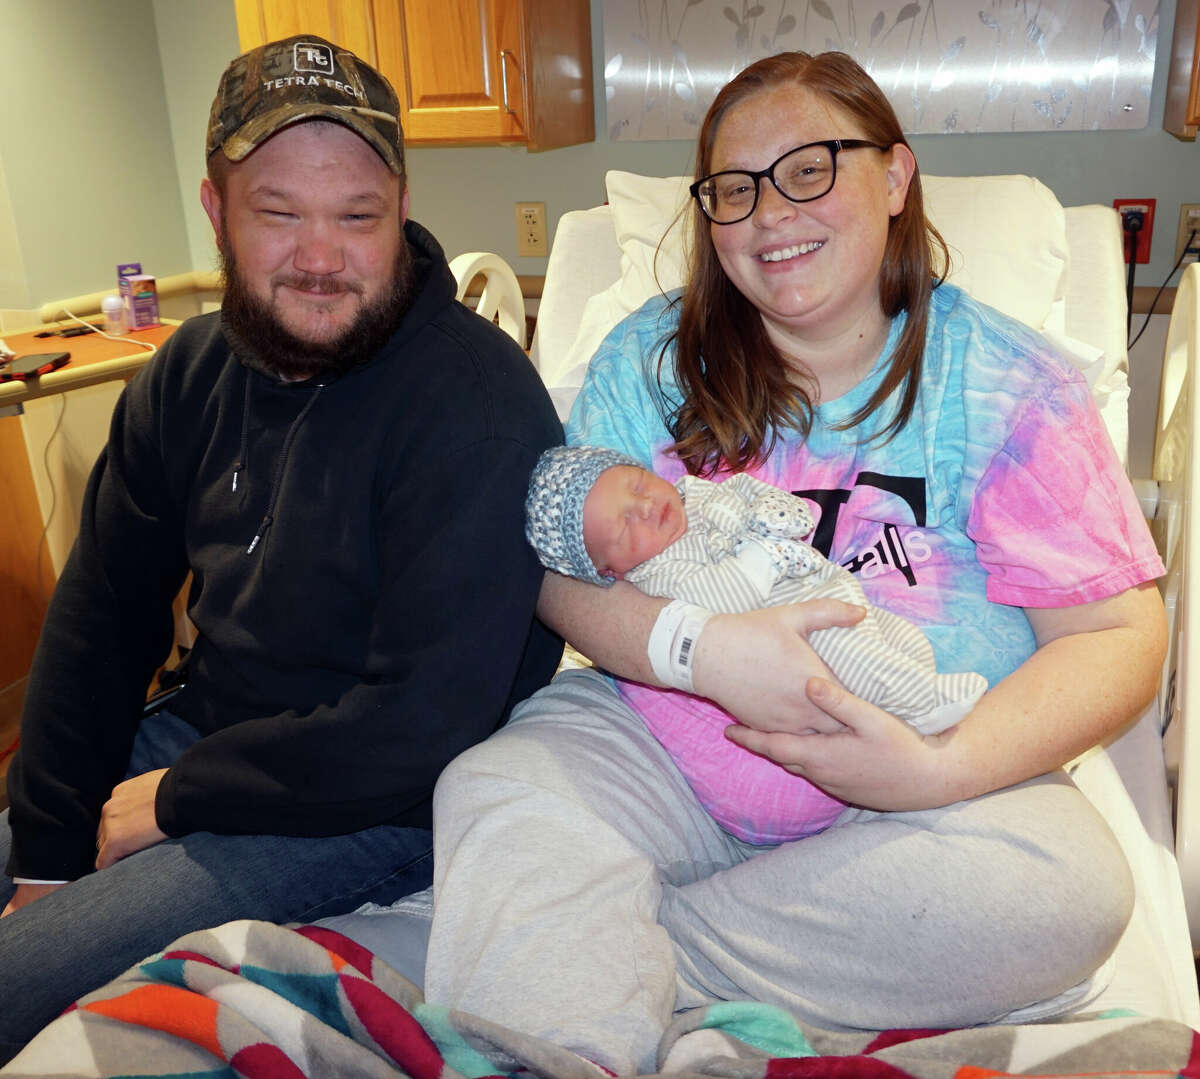 Lucas Timothy Smith was born to David and Megan Smith of Hardin at 6:18 p.m. on New Year's Day to become the first child born in 2023 at Alton Memorial Hospital.